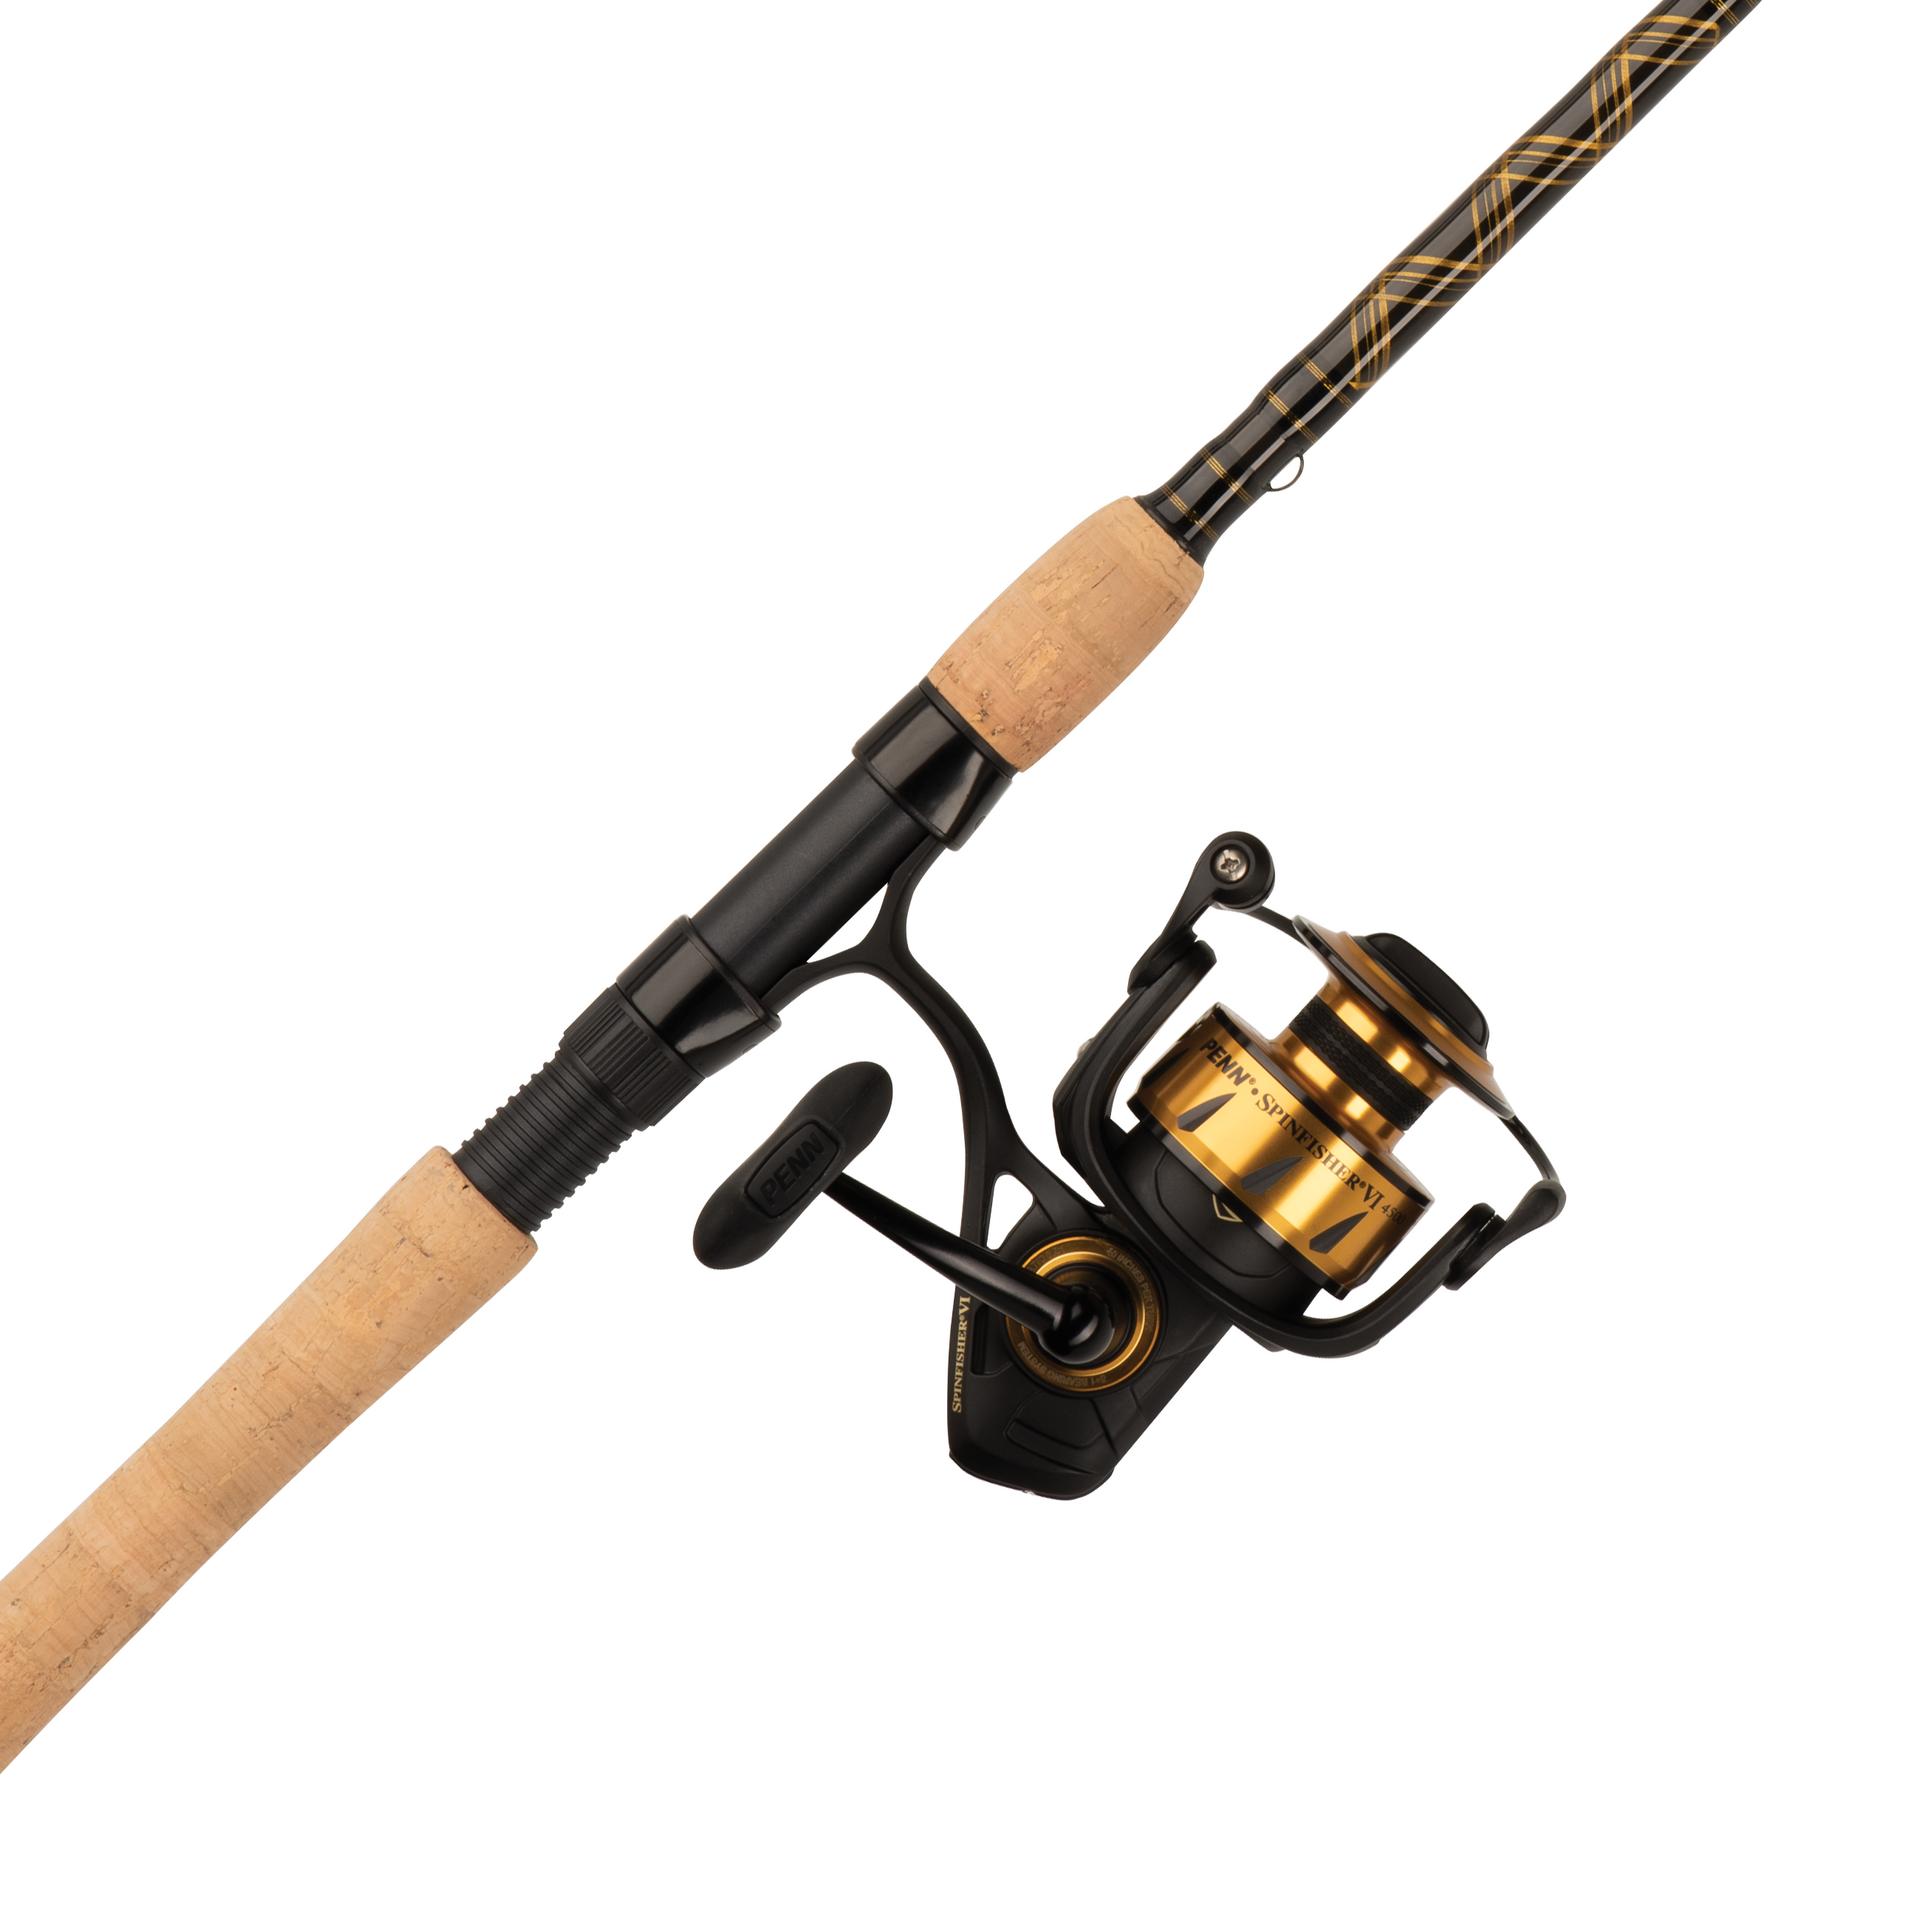 Penn Spinfisher VI Spinning Reel and Fishing Rod Combo, Size: 7', Black